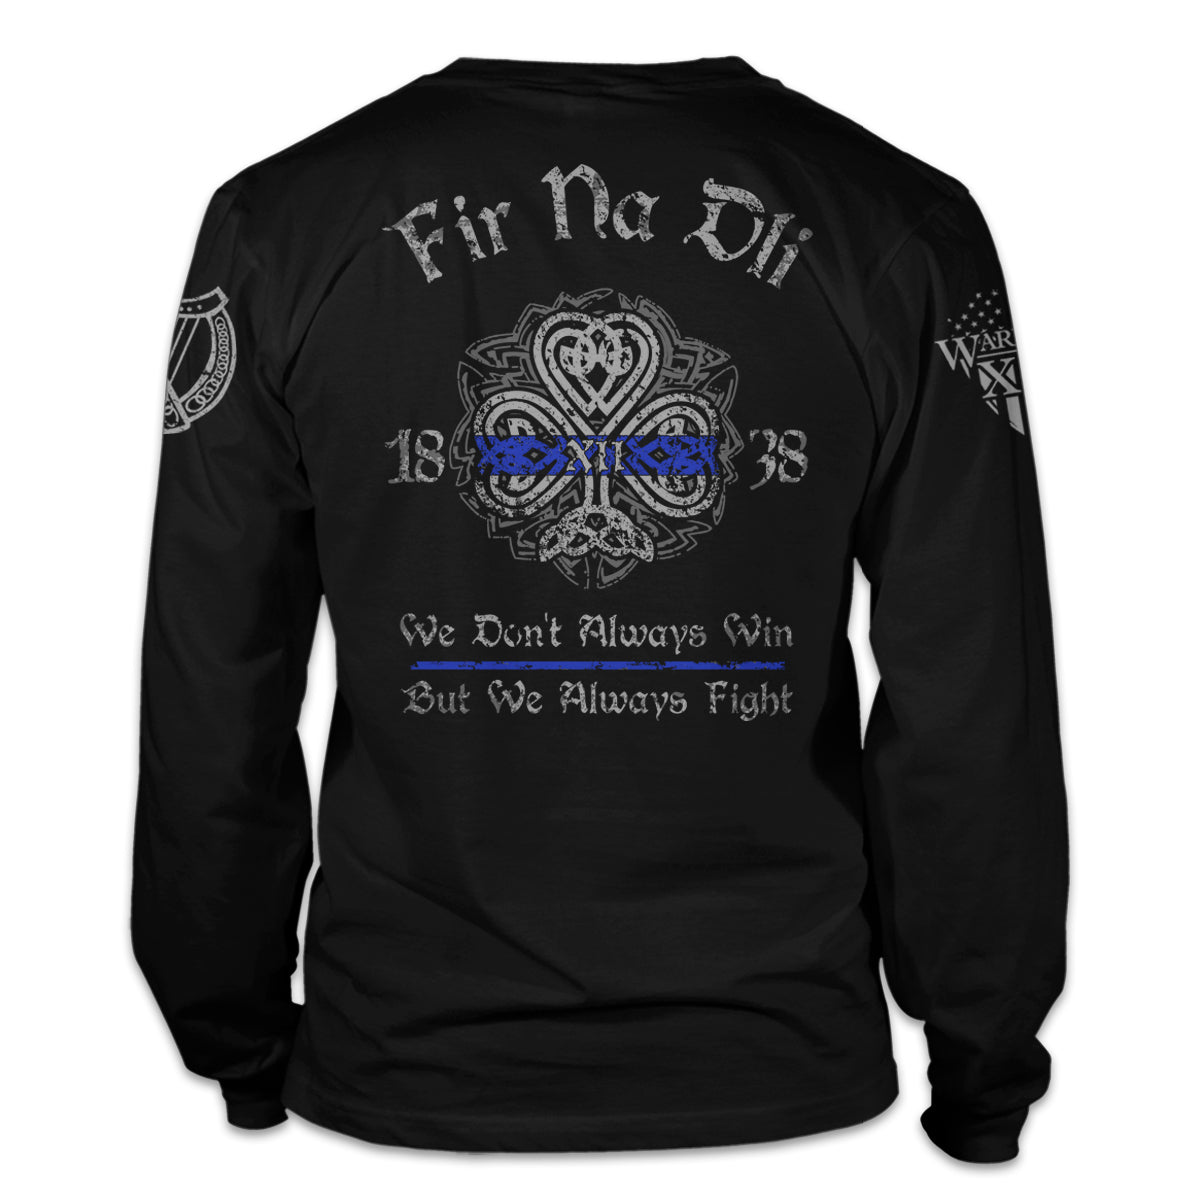 A black long sleeve shirt paying tribute to history and traditions of Irish American Law Enforcement and showing true Celtic Pride. Fir Na Dli, meaning, men of law??ç?£ in Gaelic, is written across the back of the shirt.